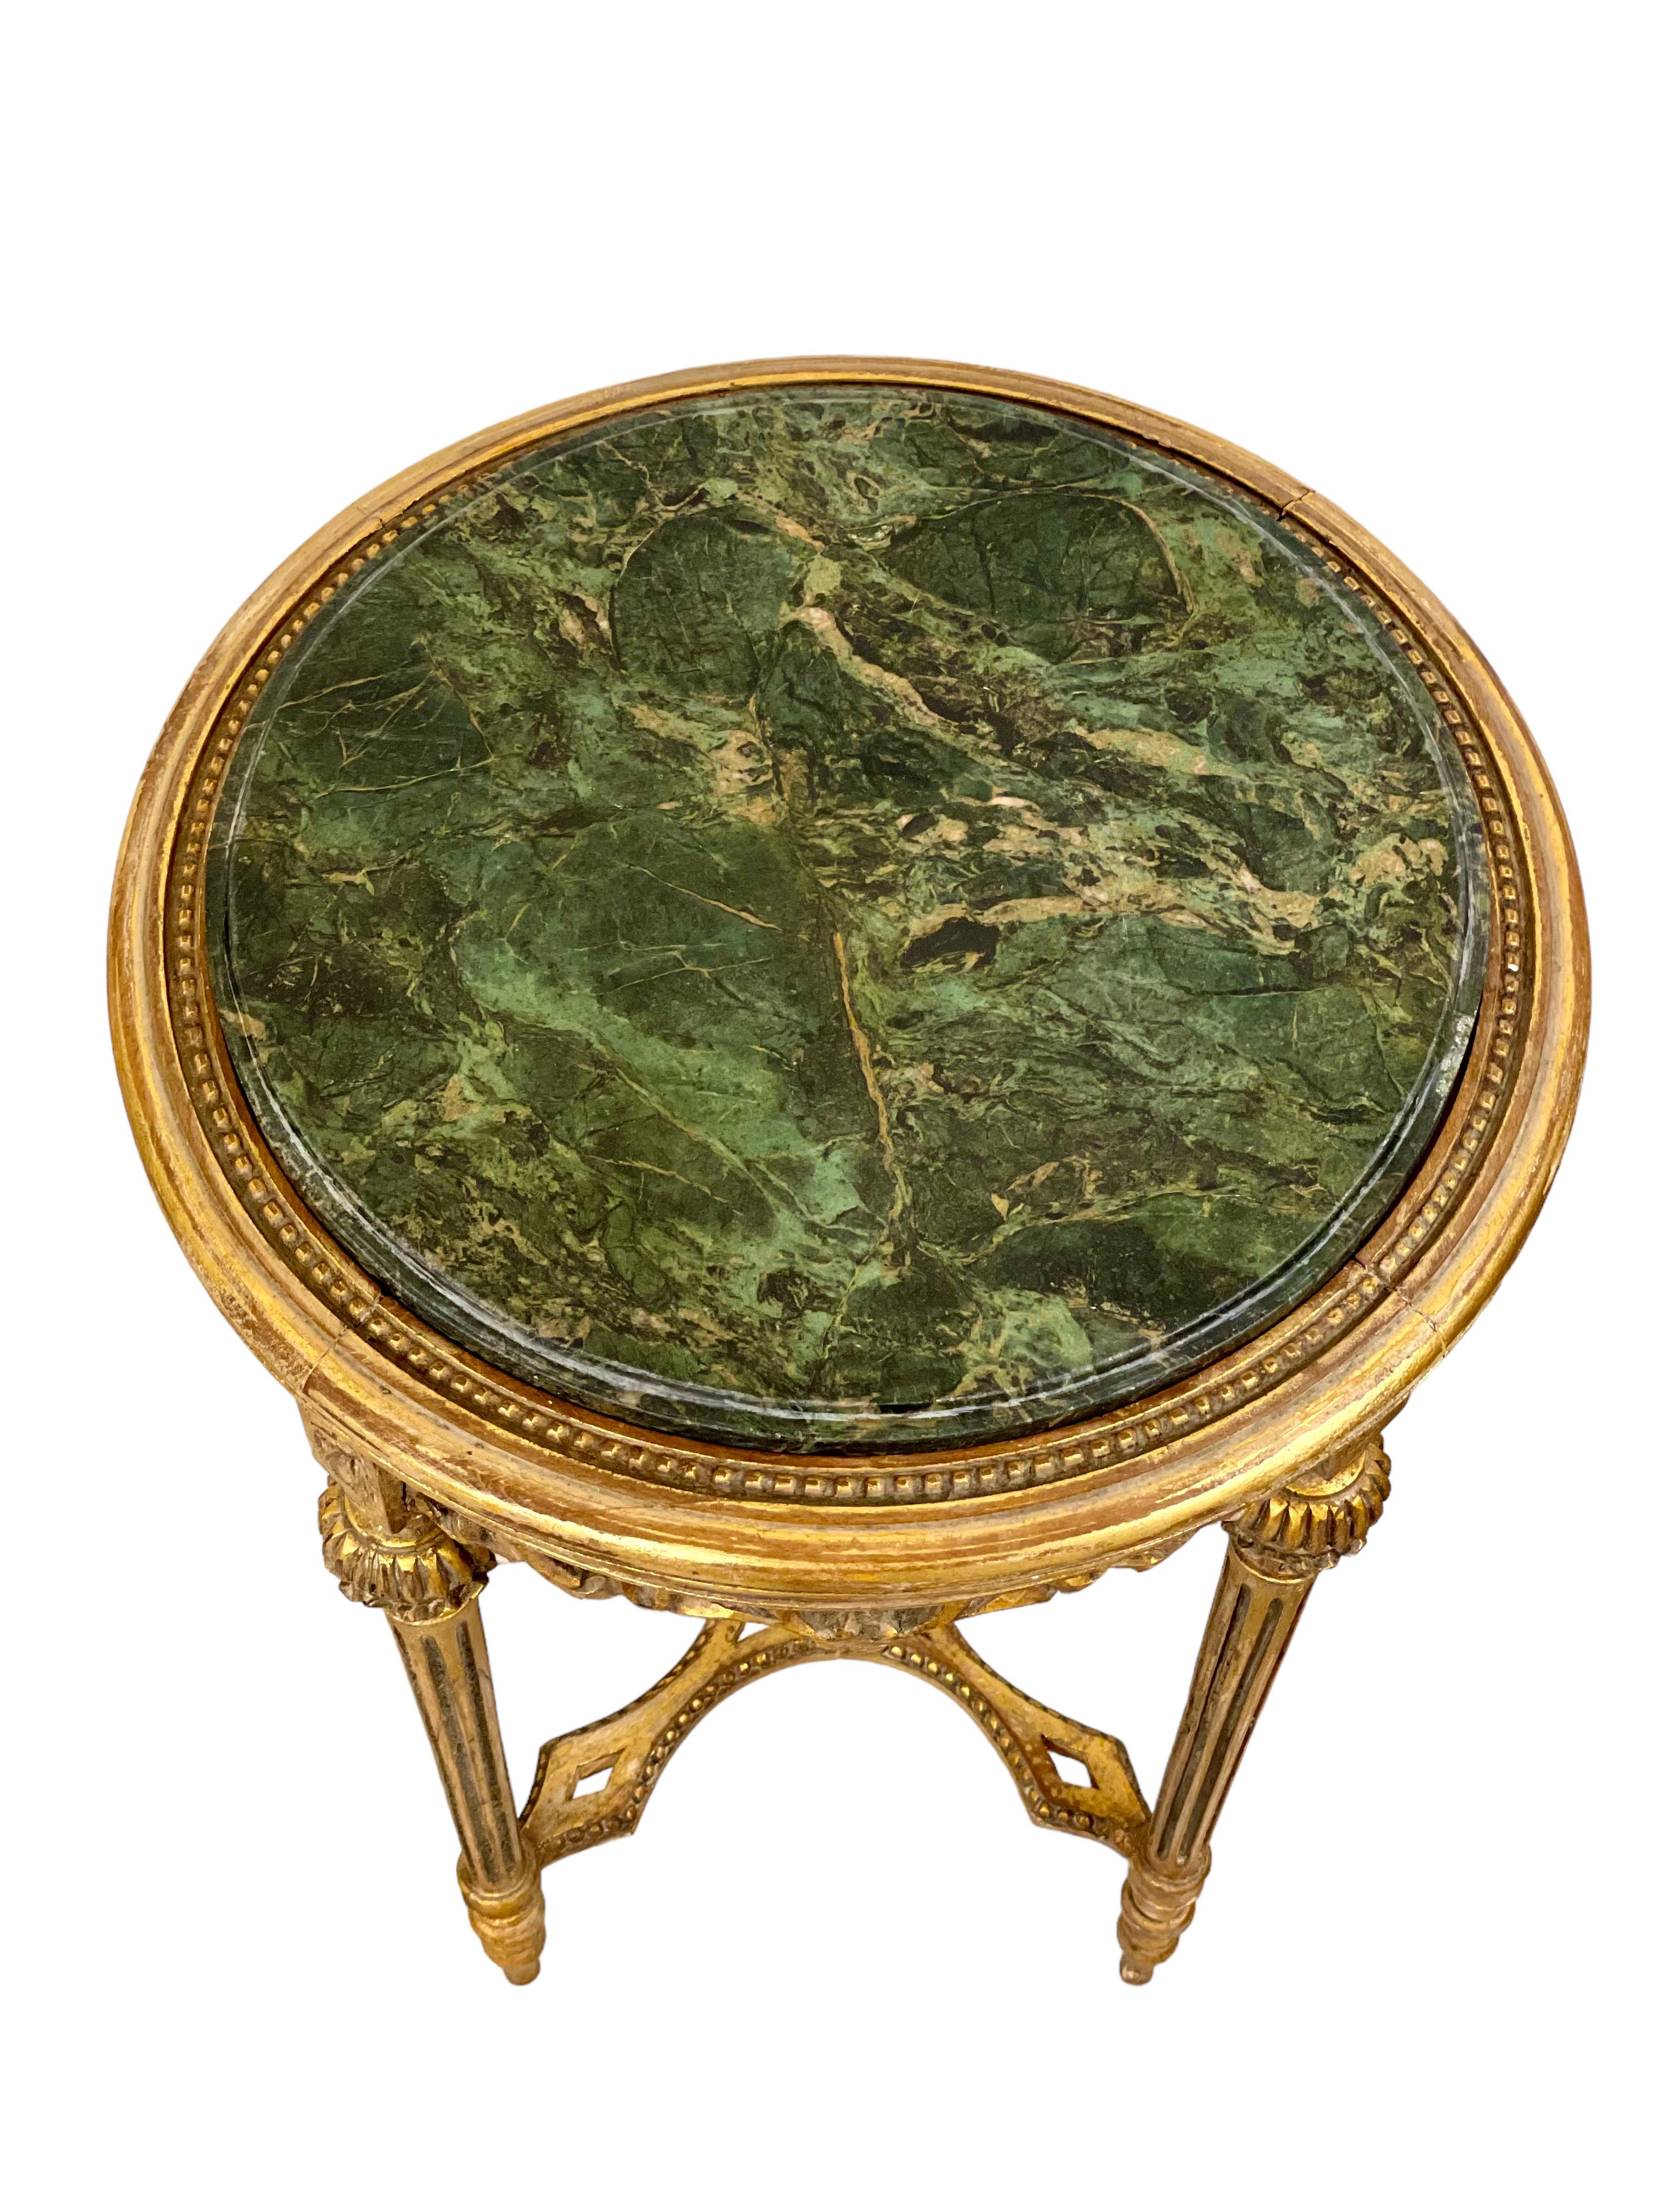 19th Century Giltwood and Green Marble Gueridon Table For Sale 7